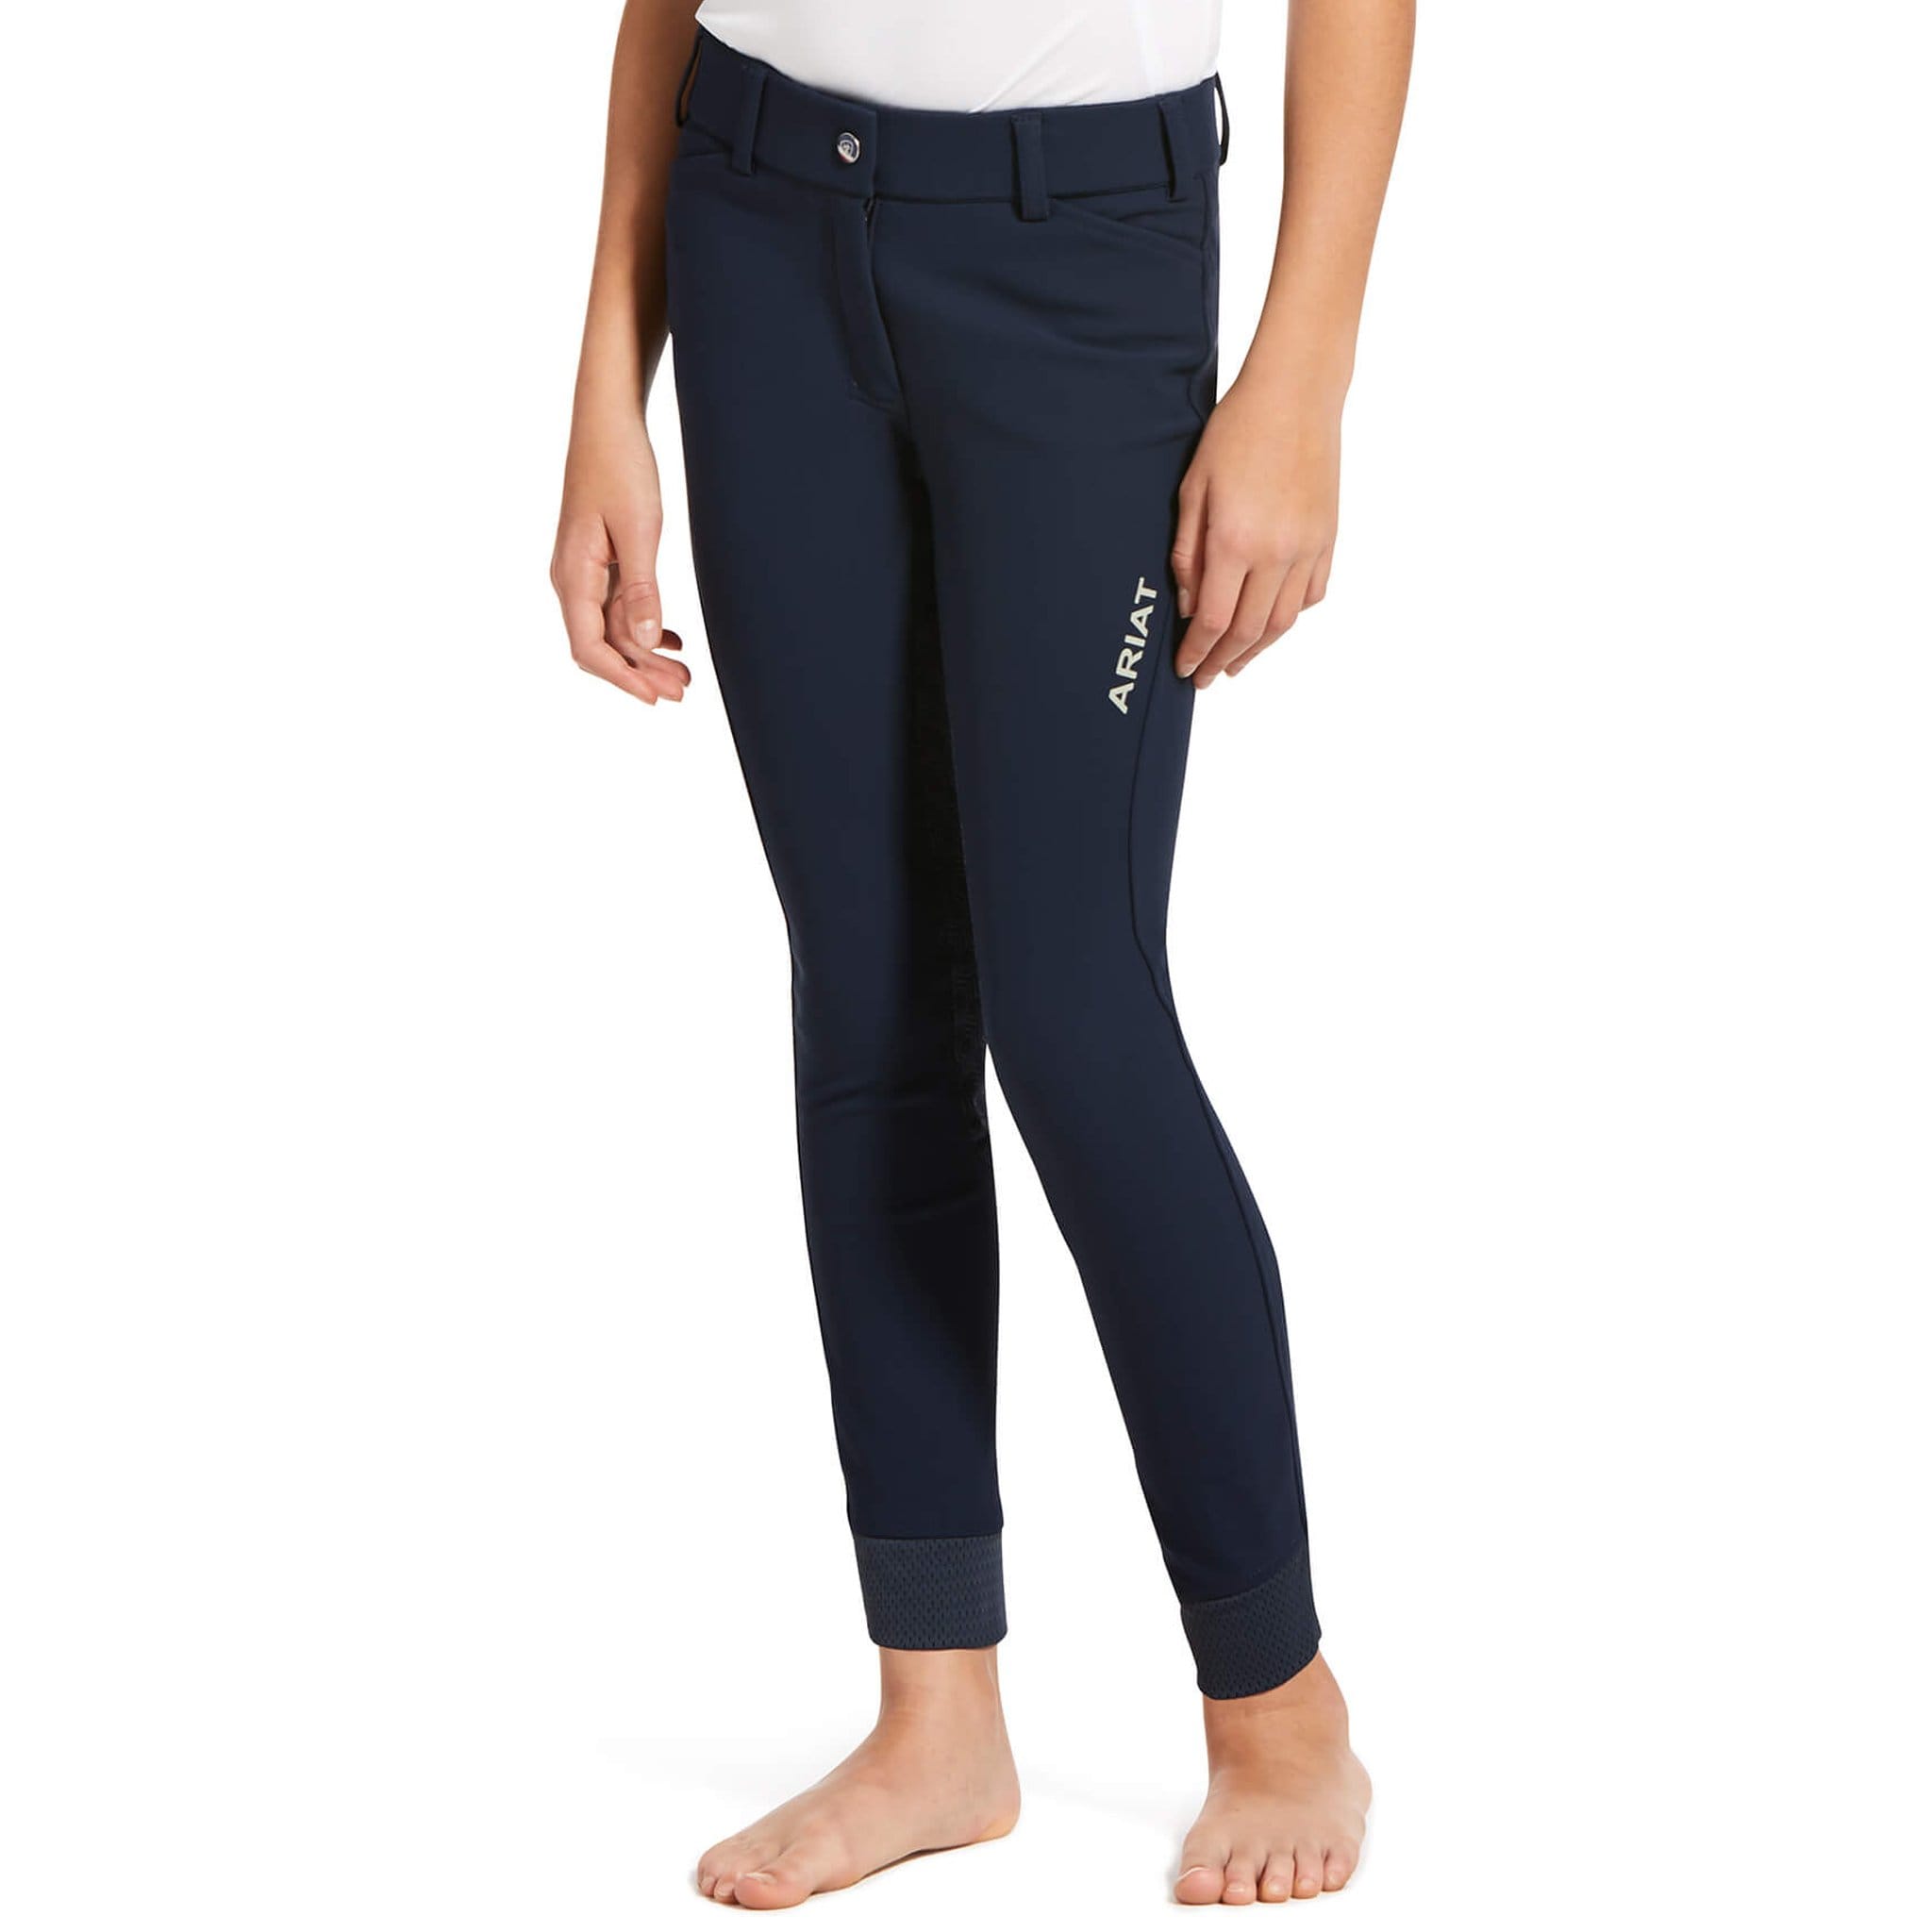 Ariat Youth Tri Factor Grip Silicone Full Seat Breeches